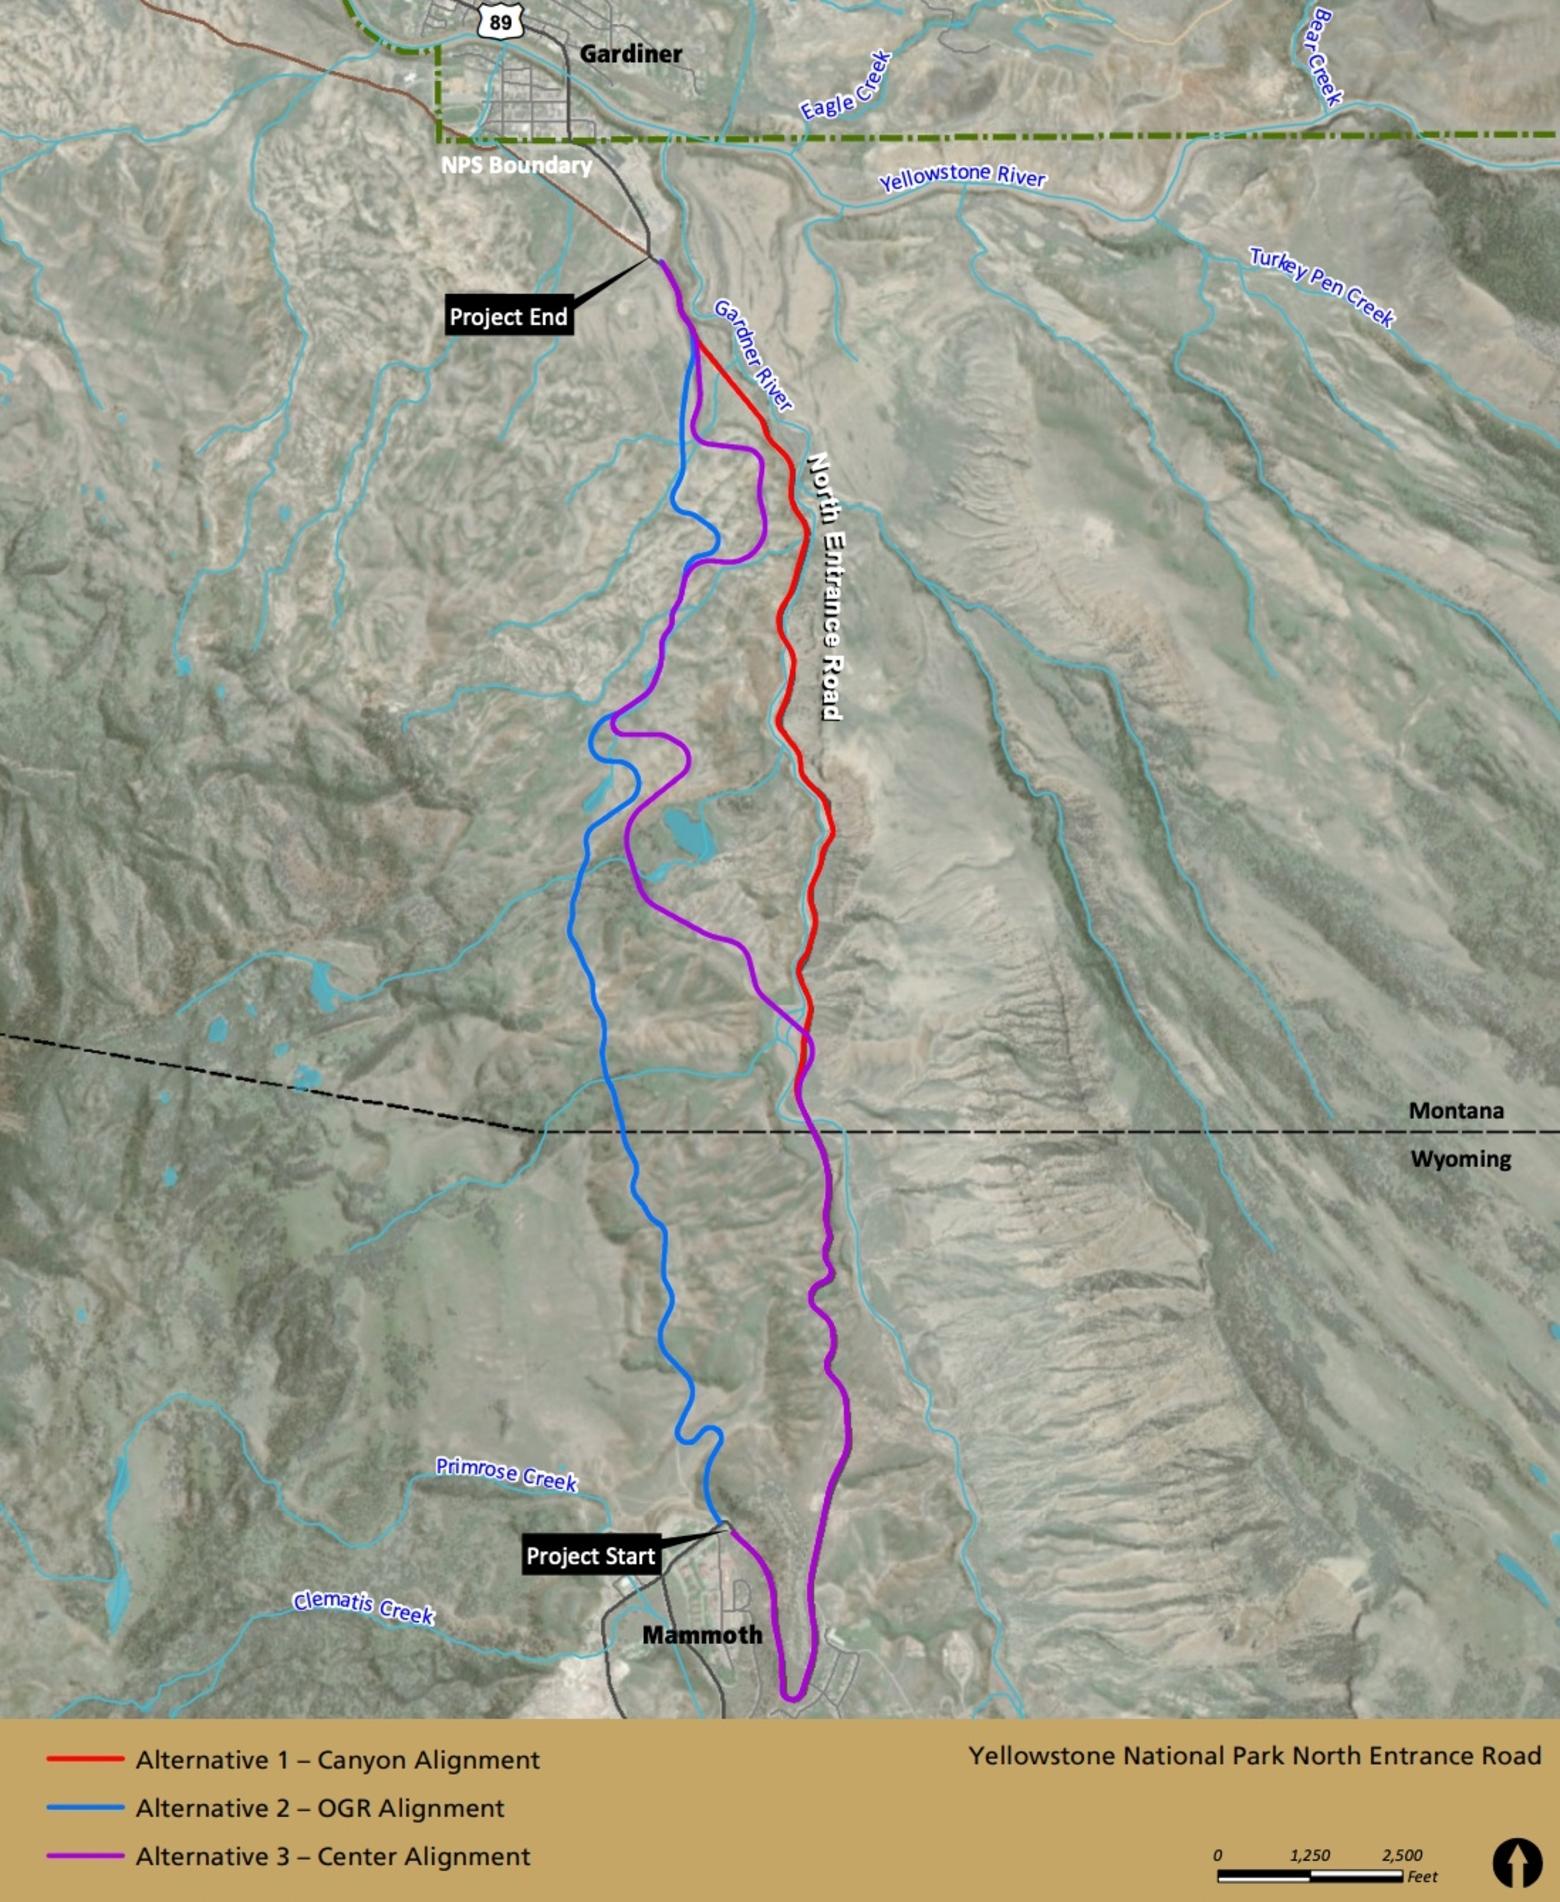 Yellowstone officials are seeking public comment on three options to provide permanent solutions to the North Entrance Road, which saw significant damage during flooding in June 2022. Map courtesy NPS